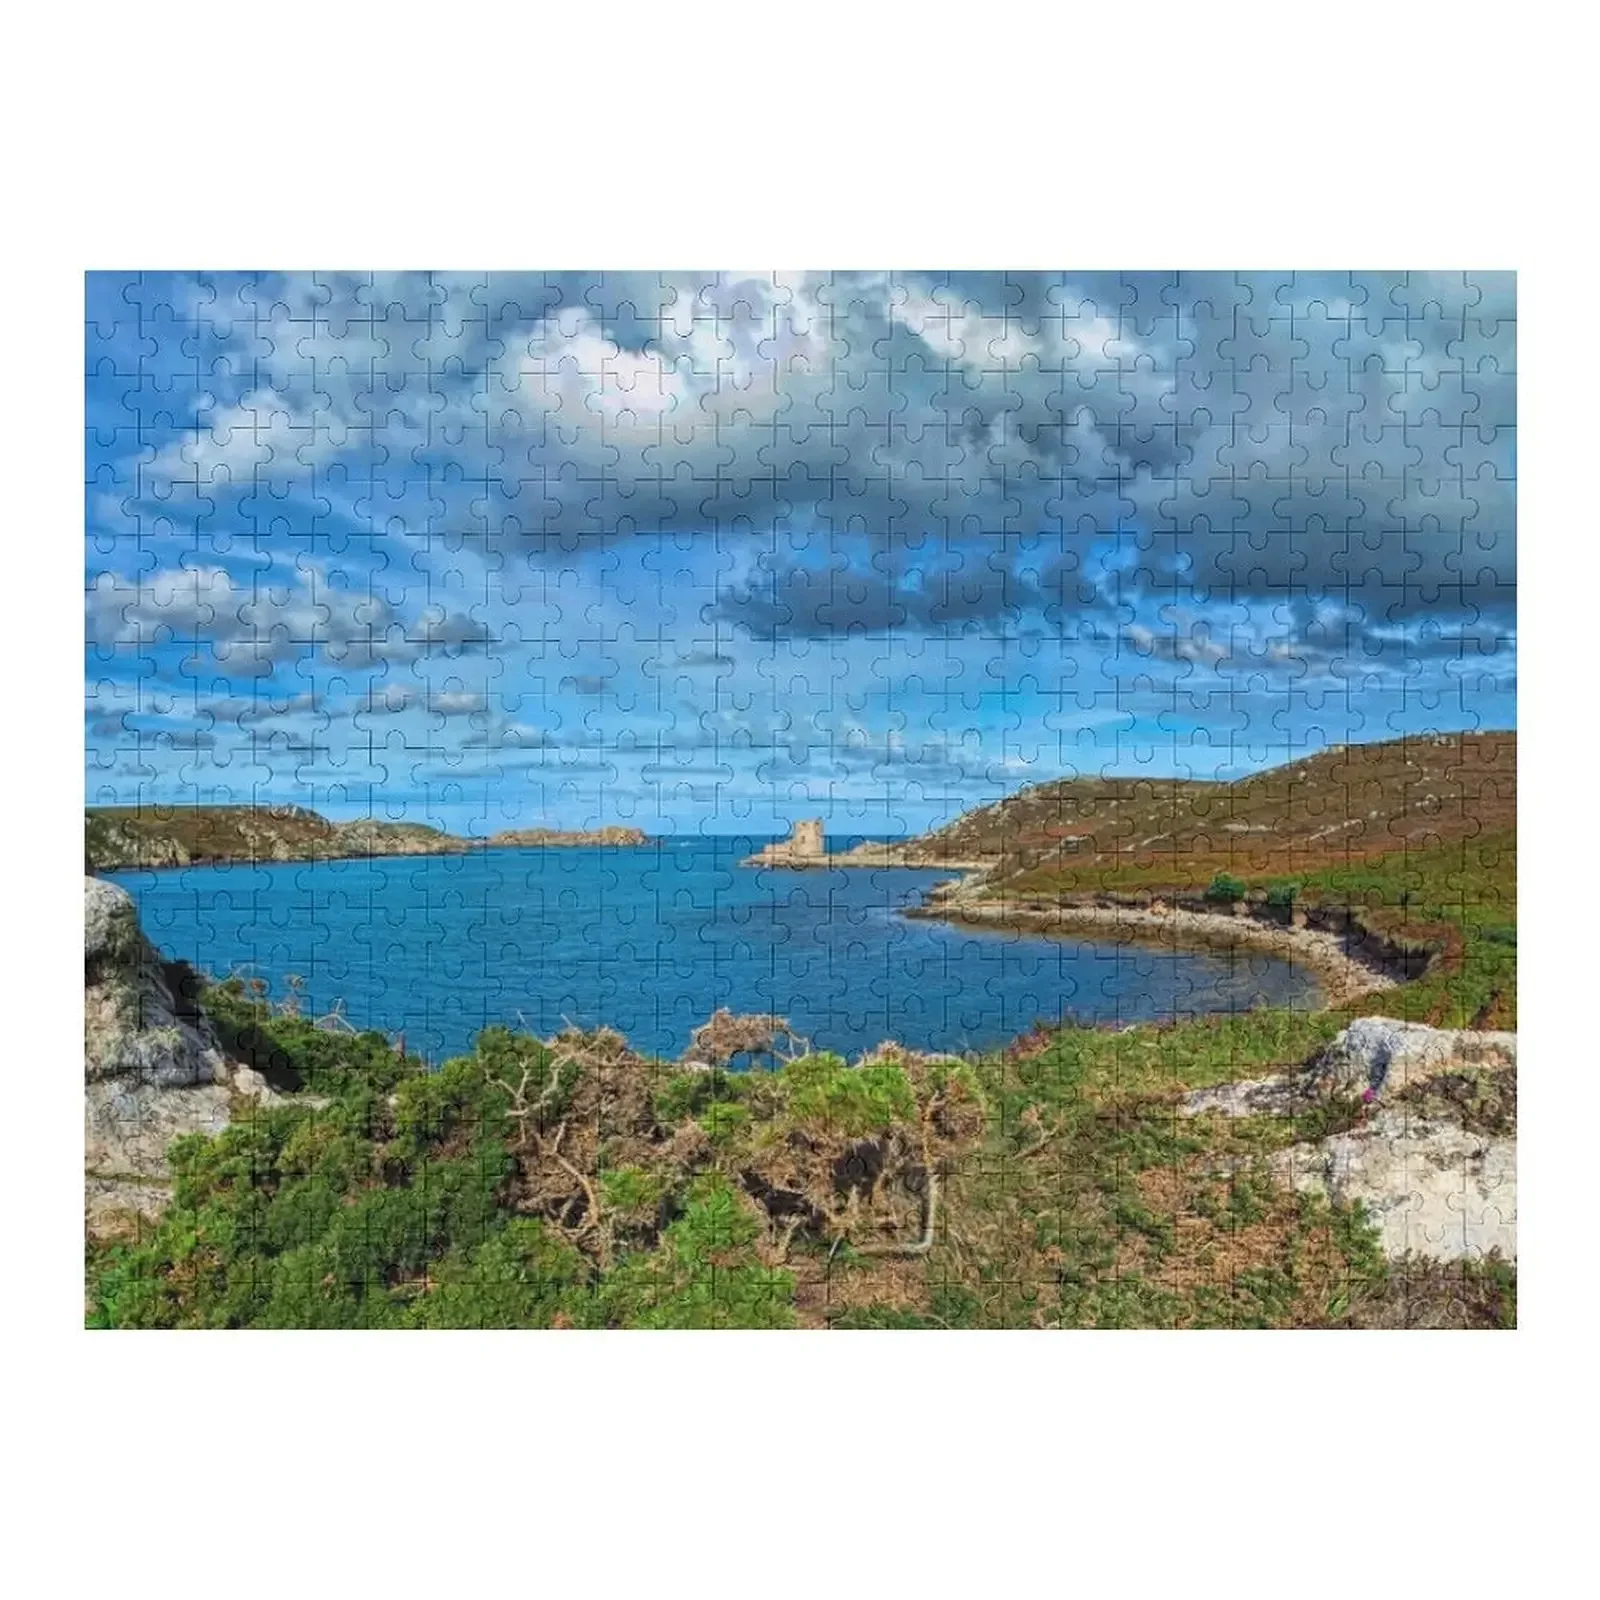 Cromwells Castle Jigsaw Puzzle With Photo Custom Gifts Woodens For Adults Puzzle tom thomson birches jigsaw puzzle personalised customs with photo woodens for adults puzzle